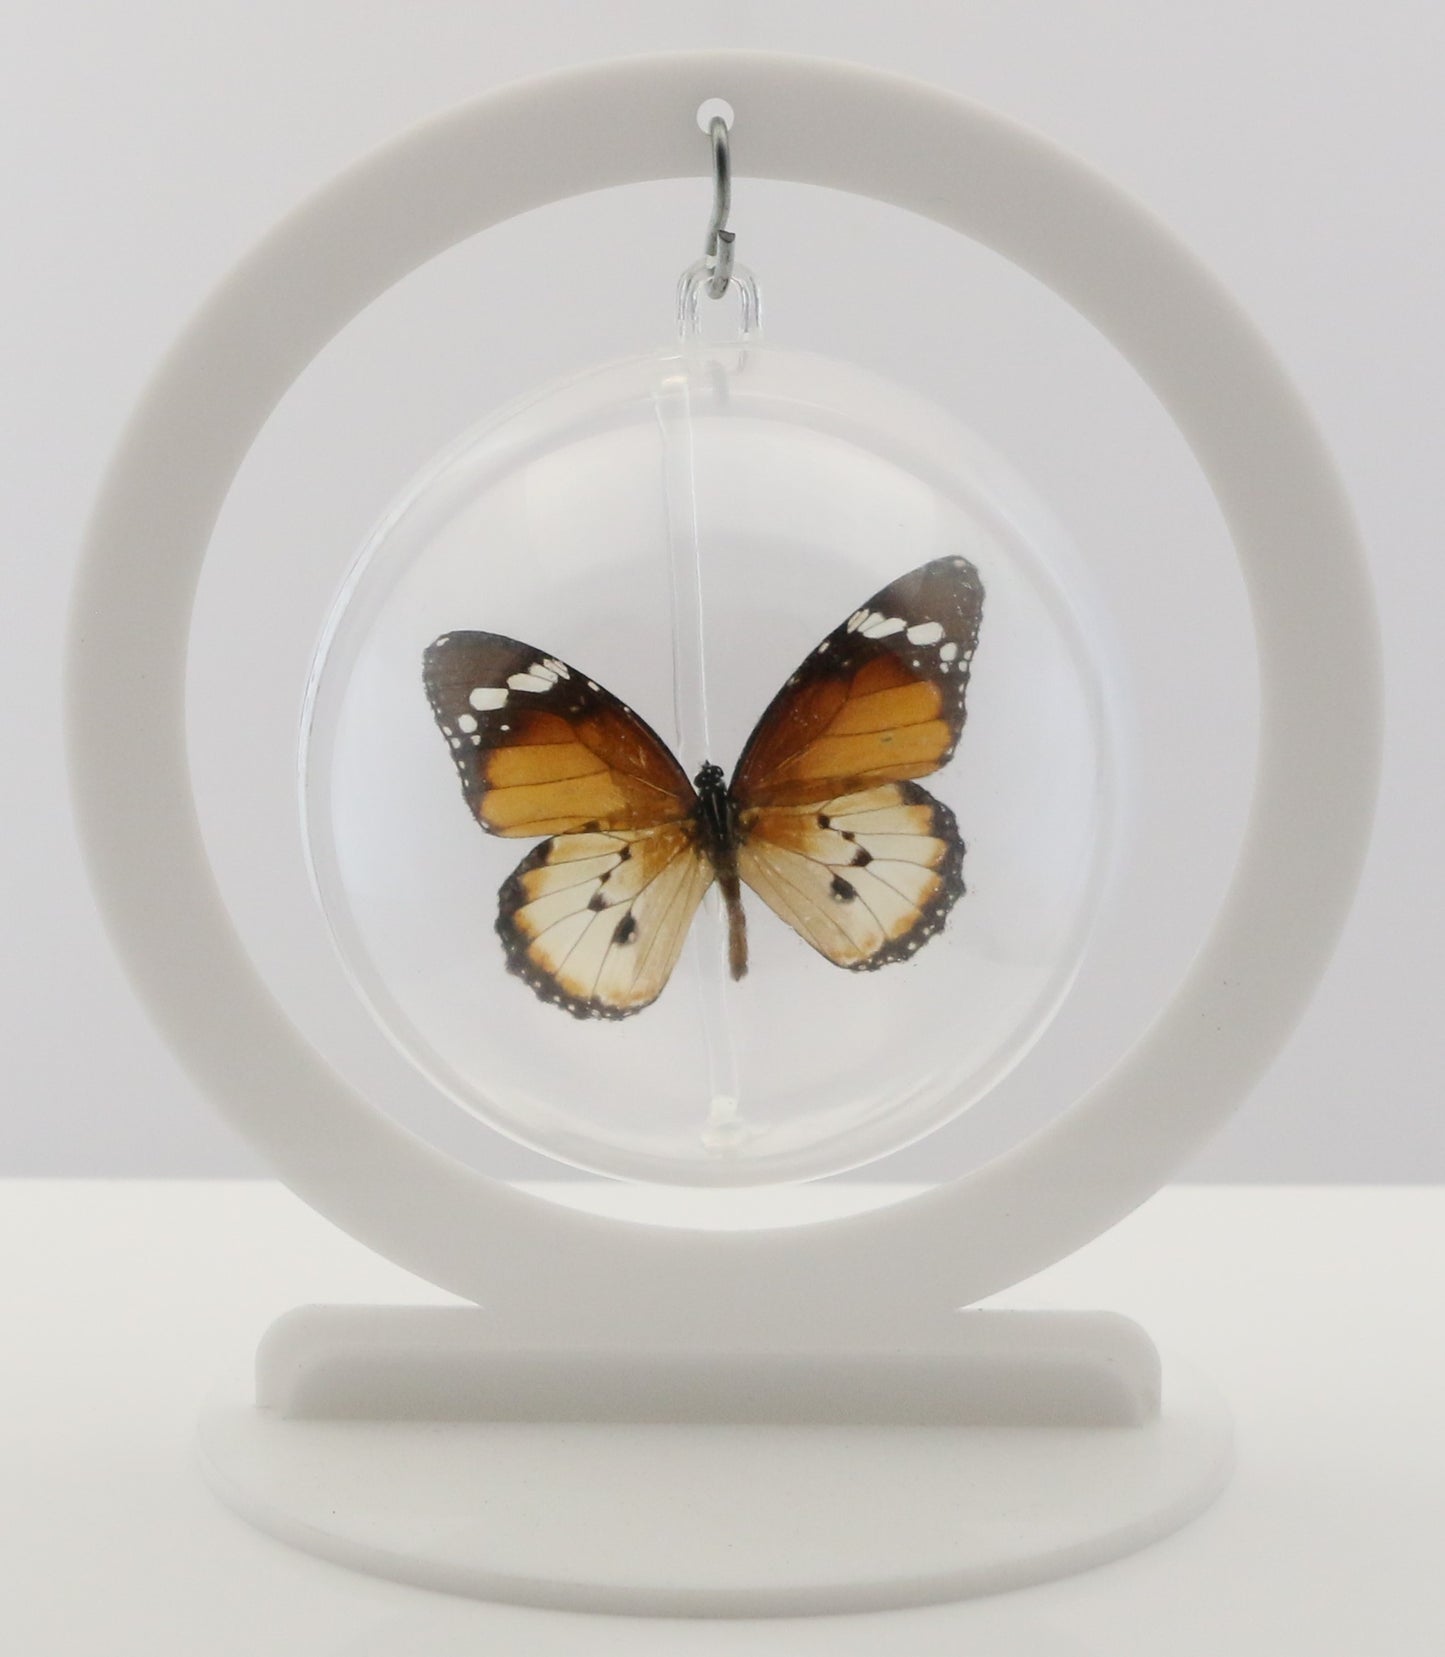 750201 - Butterfly Bubbles - Med. - Round - Plain Tiger Butterfly